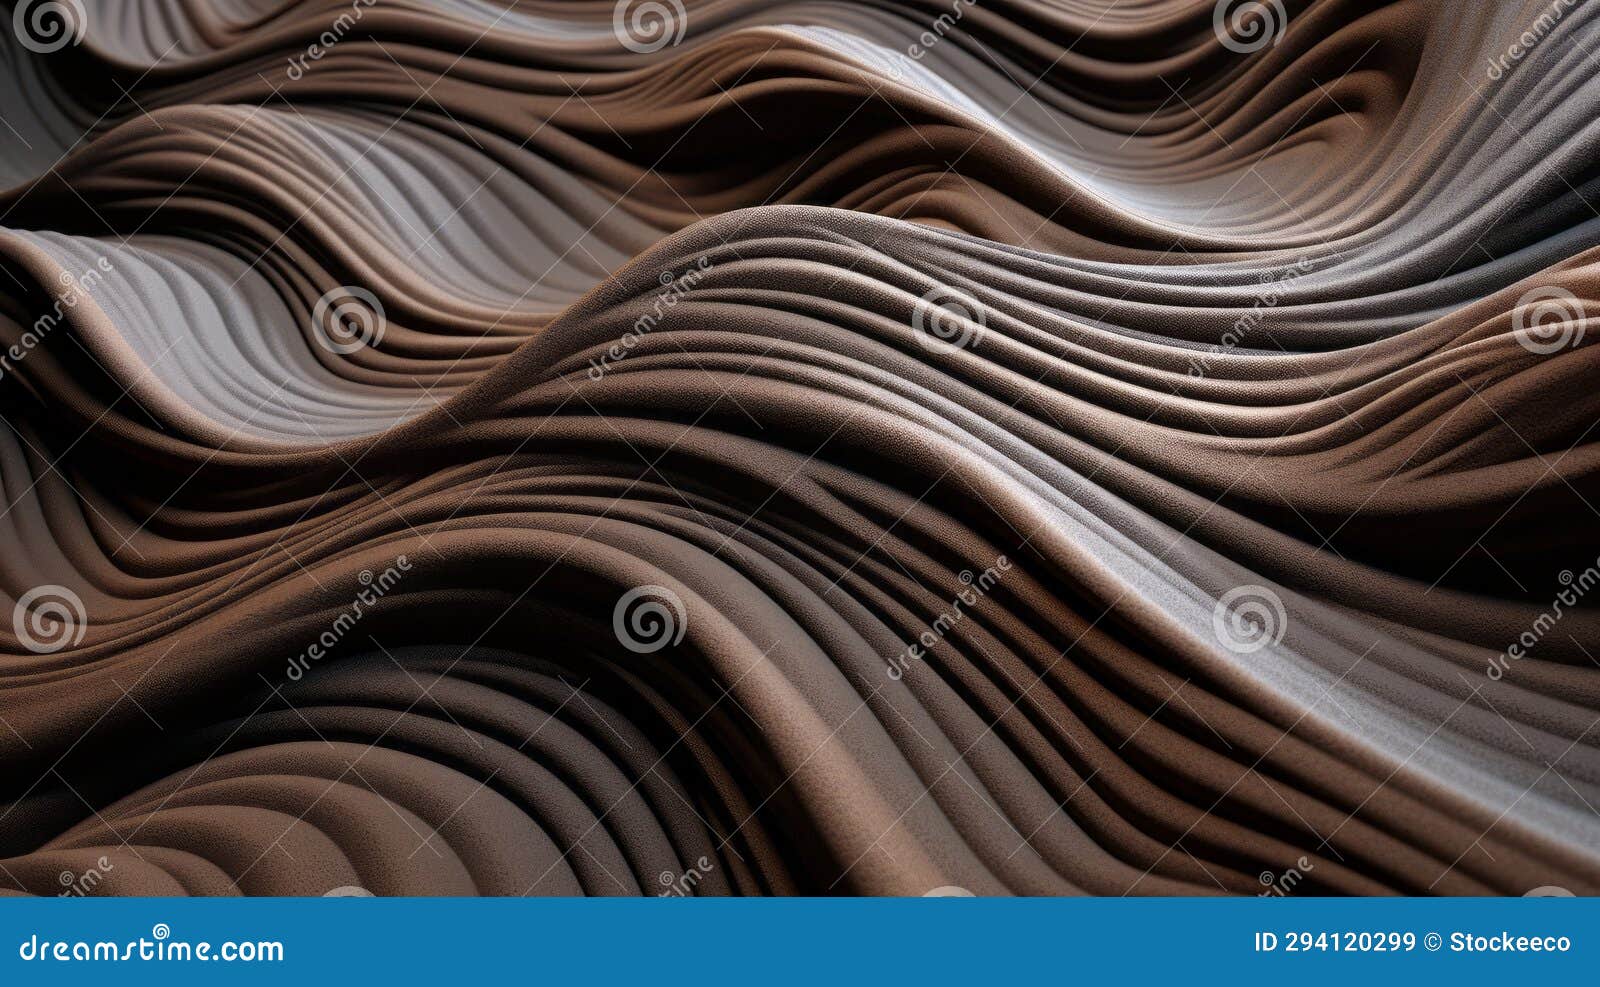 surreal 3d chocolate wavy textures: a photobashing masterpiece